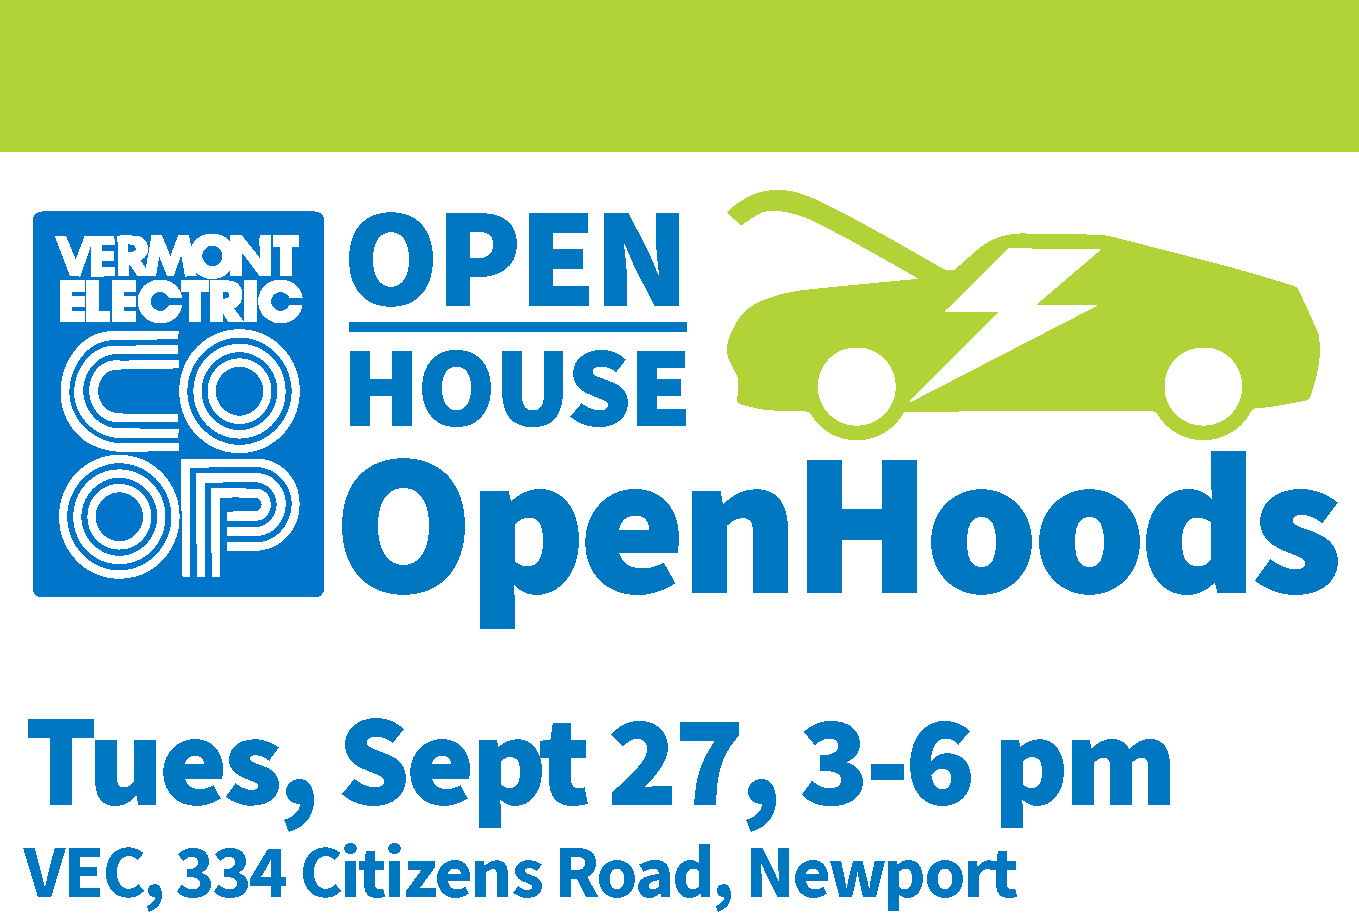 VEC to Hold “Open House/Open Hoods” Event Sept 27